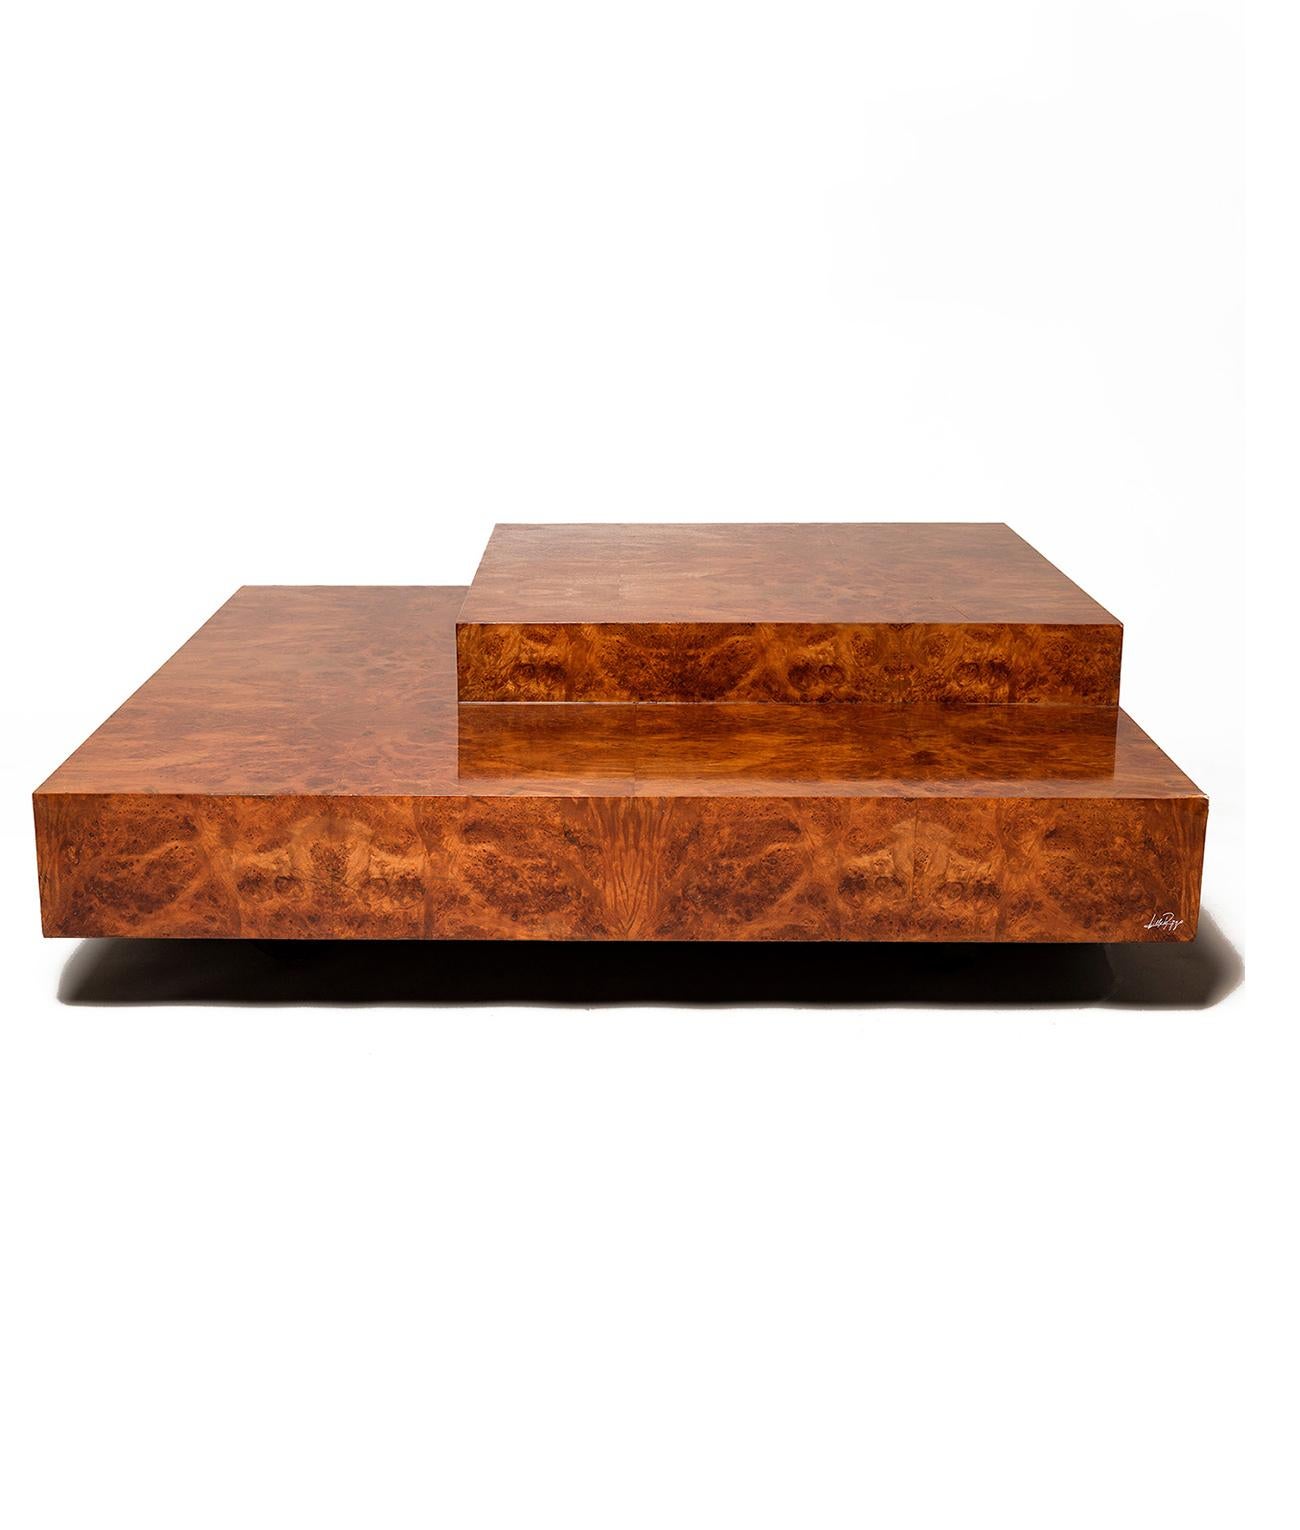 Willy Rizzo coffee table, designed across two levels with a hovering effect. 
Wood veneer with brass feet and Willy Rizzo's iconic signature to one corner.